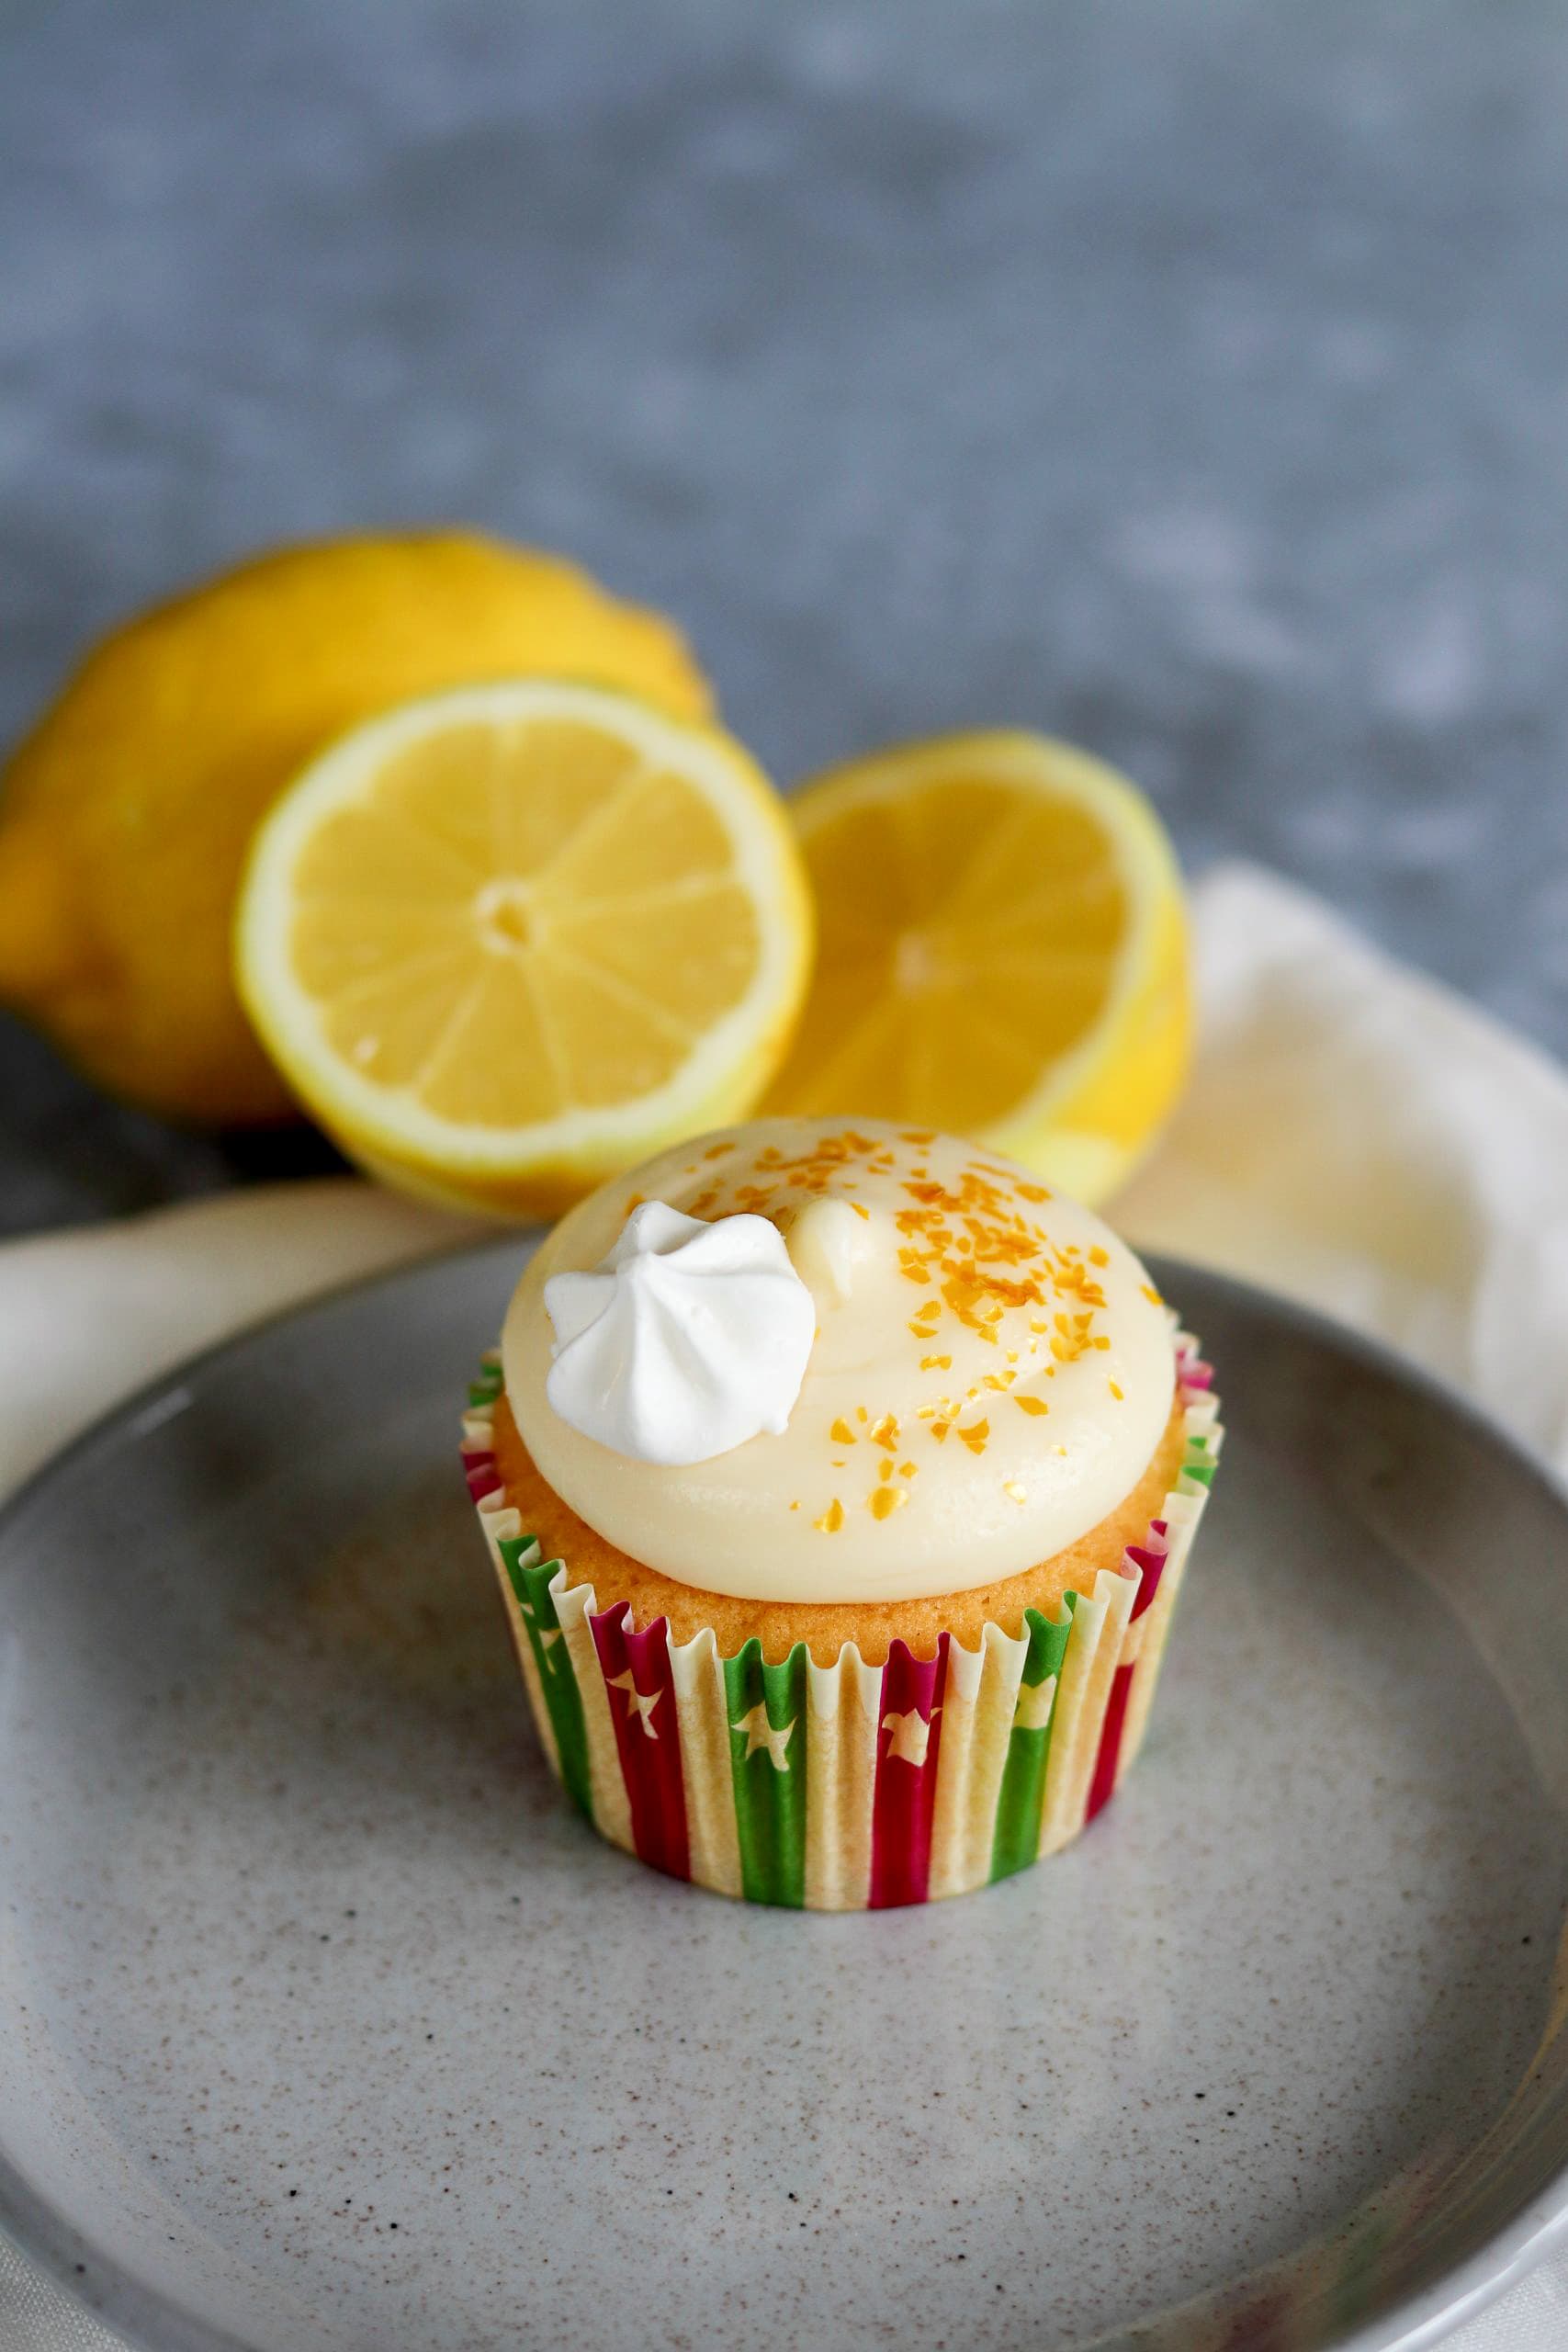 Lemon Curd Cupcakes with Lemon Curd Cream Cheese Frosting